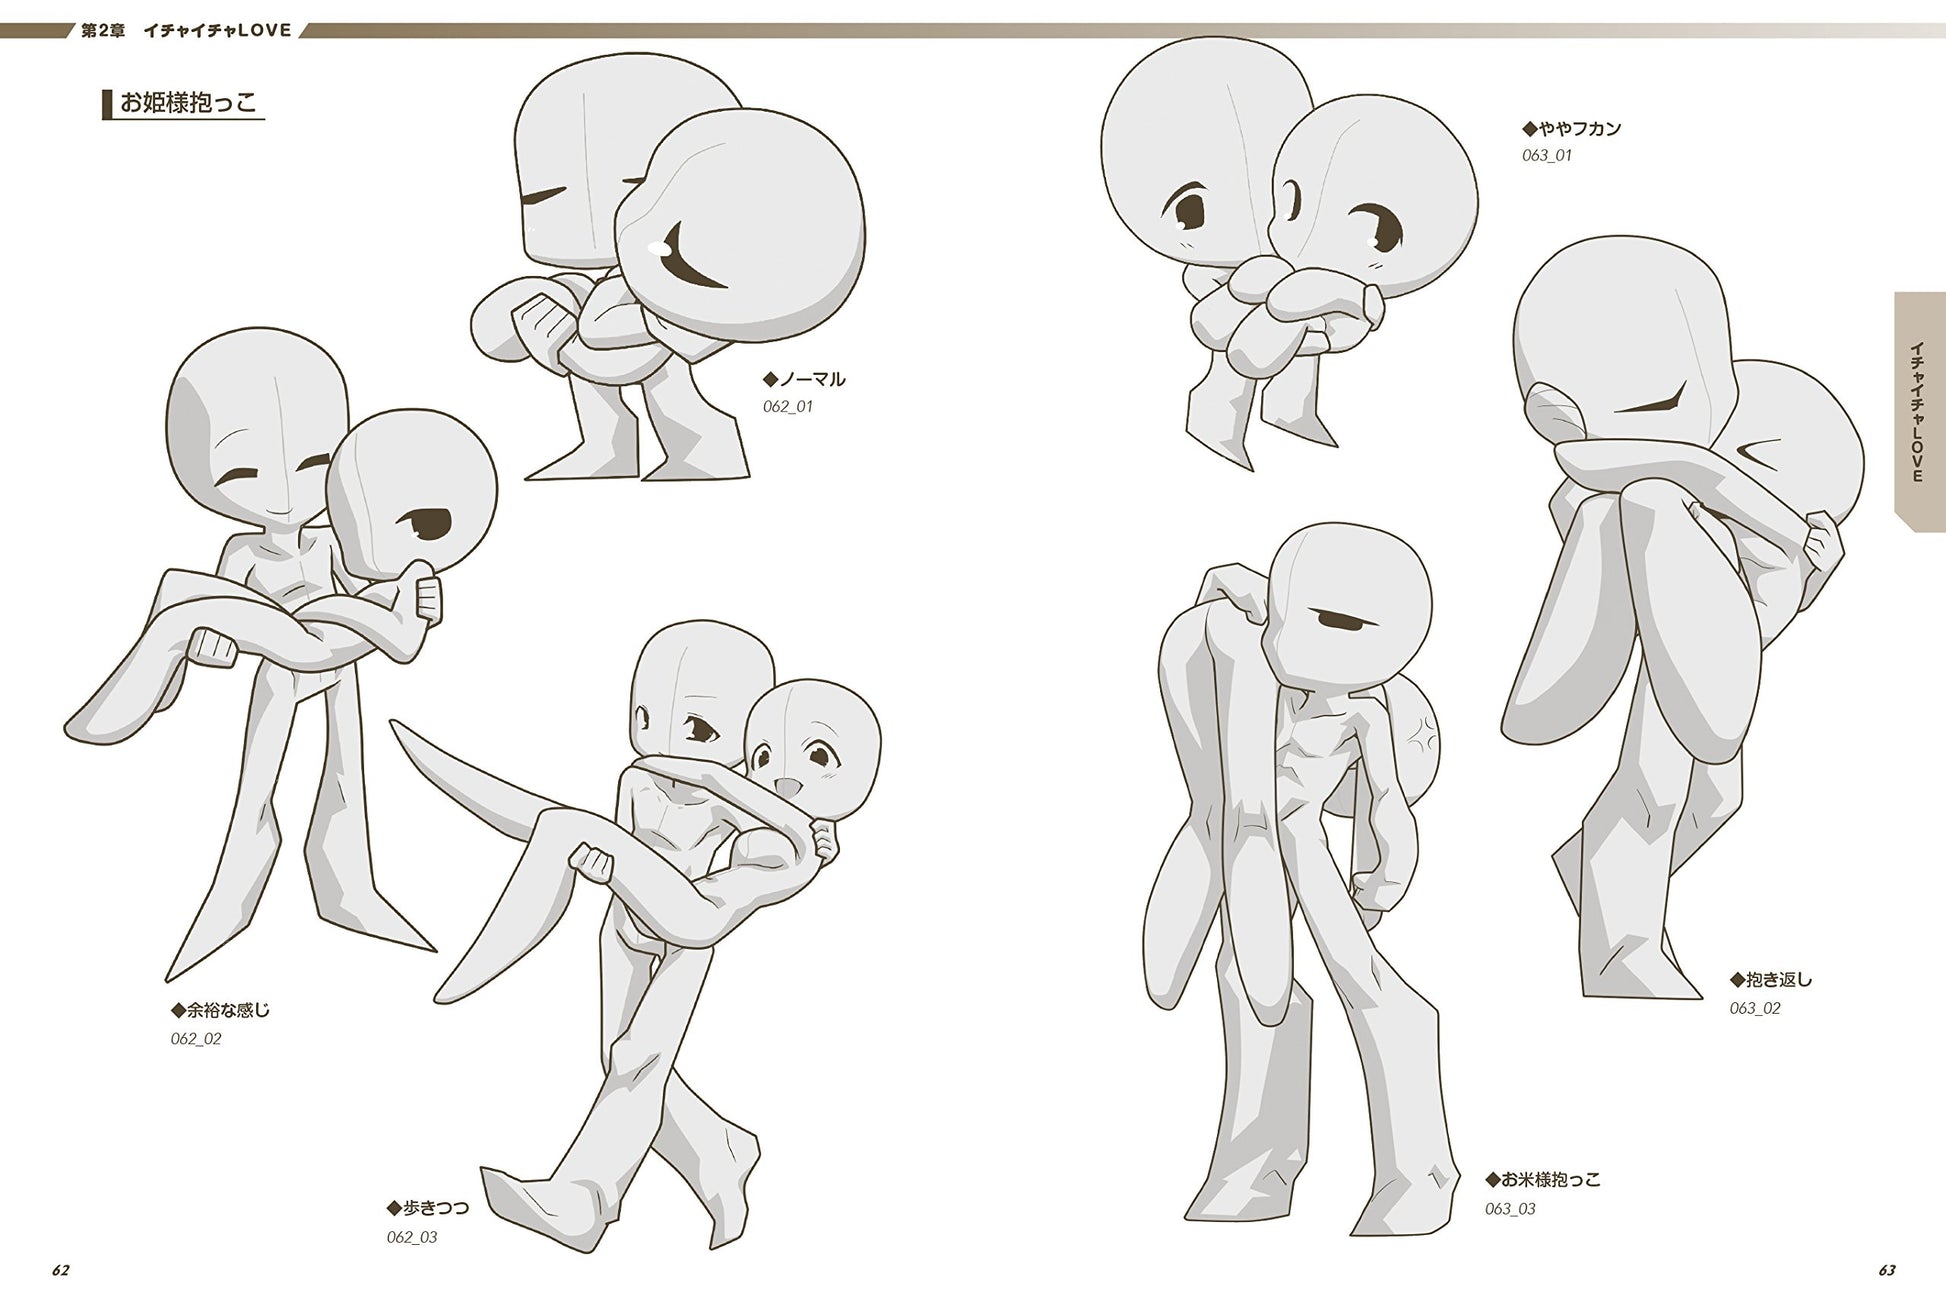 How to draw Manga Anime Super Deformed Pose Collection character variations